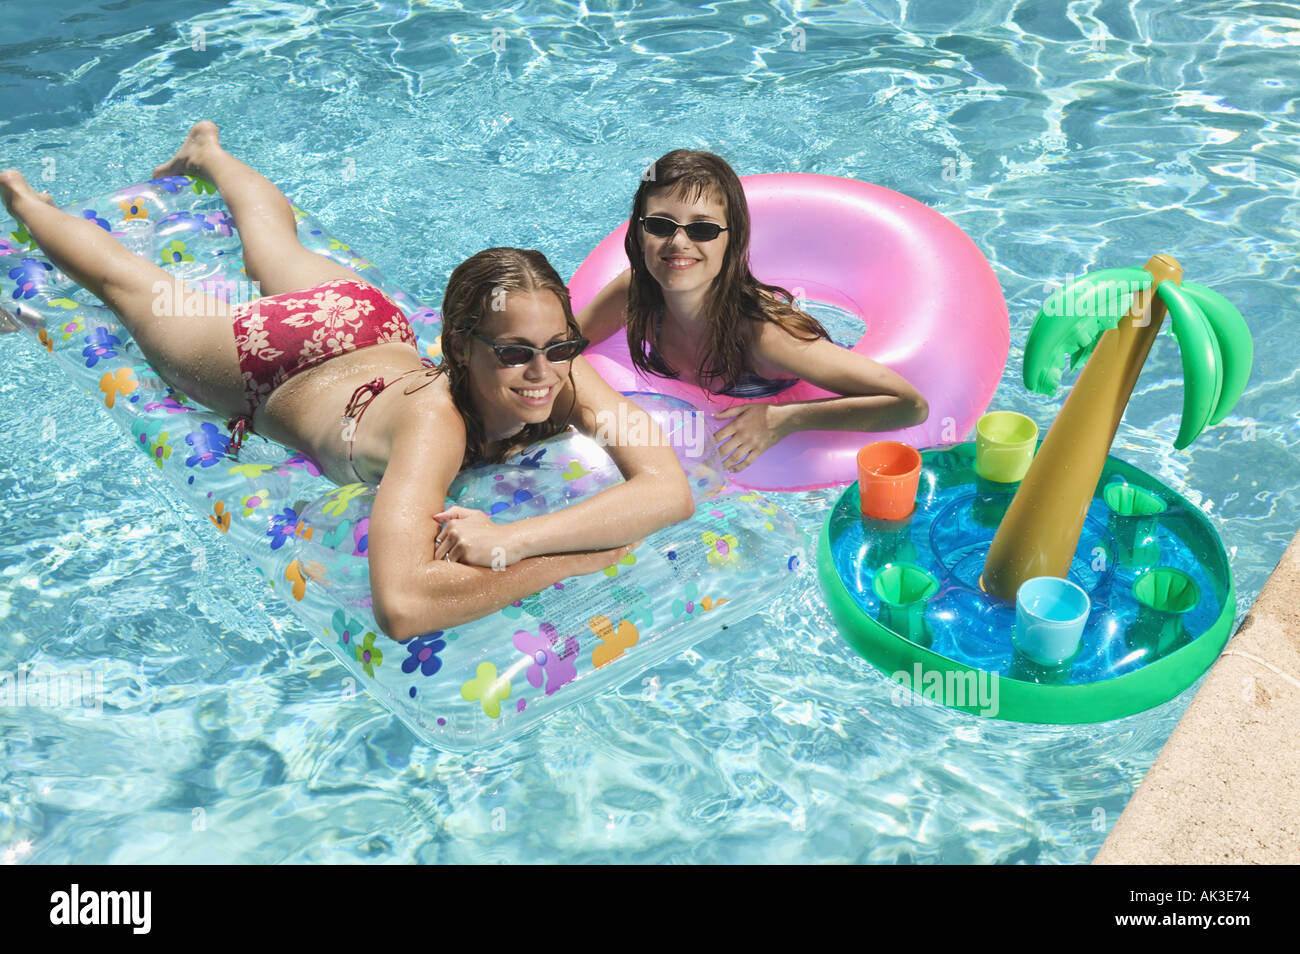 Two teenage girls lounging in a swimming pool Stock Photo